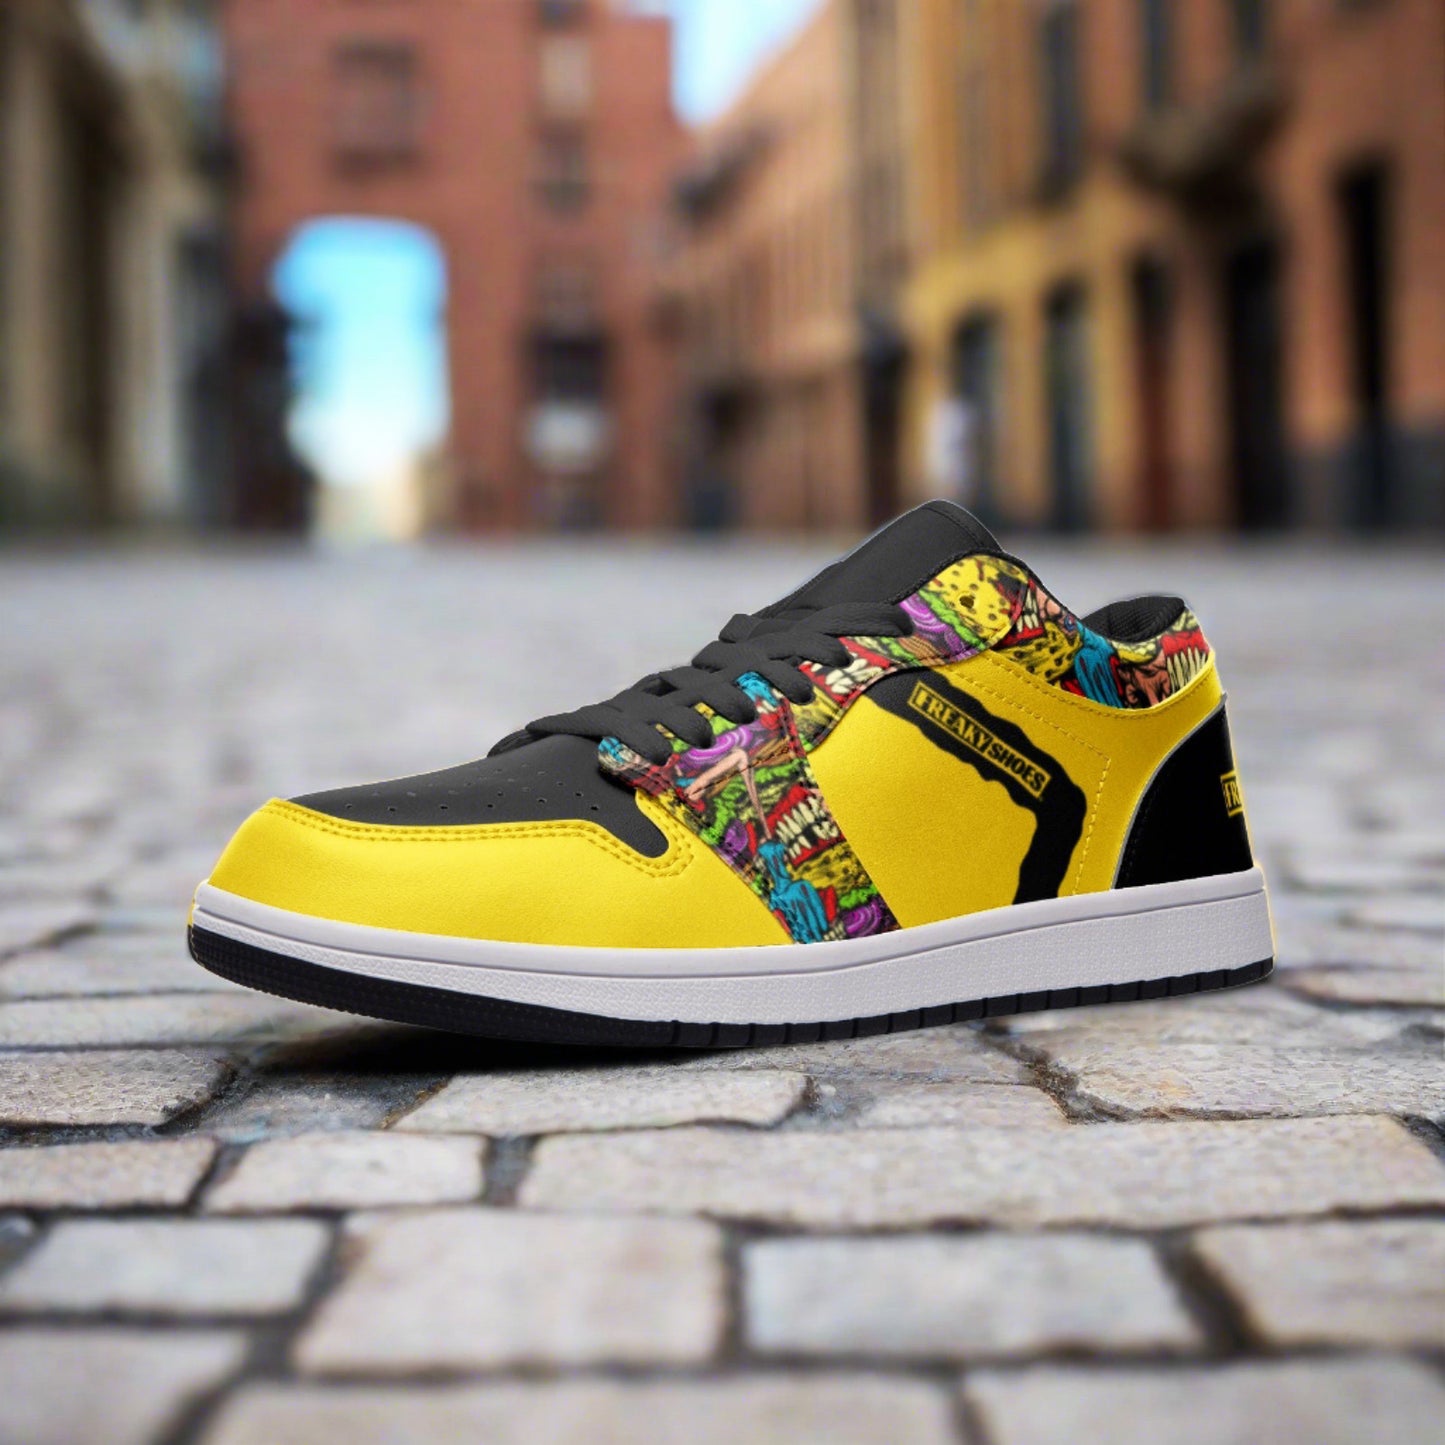 Freaky Shoes® Black & Yellow Freestyle Art Unisex Low Top Δερμάτινα αθλητικά παπούτσια